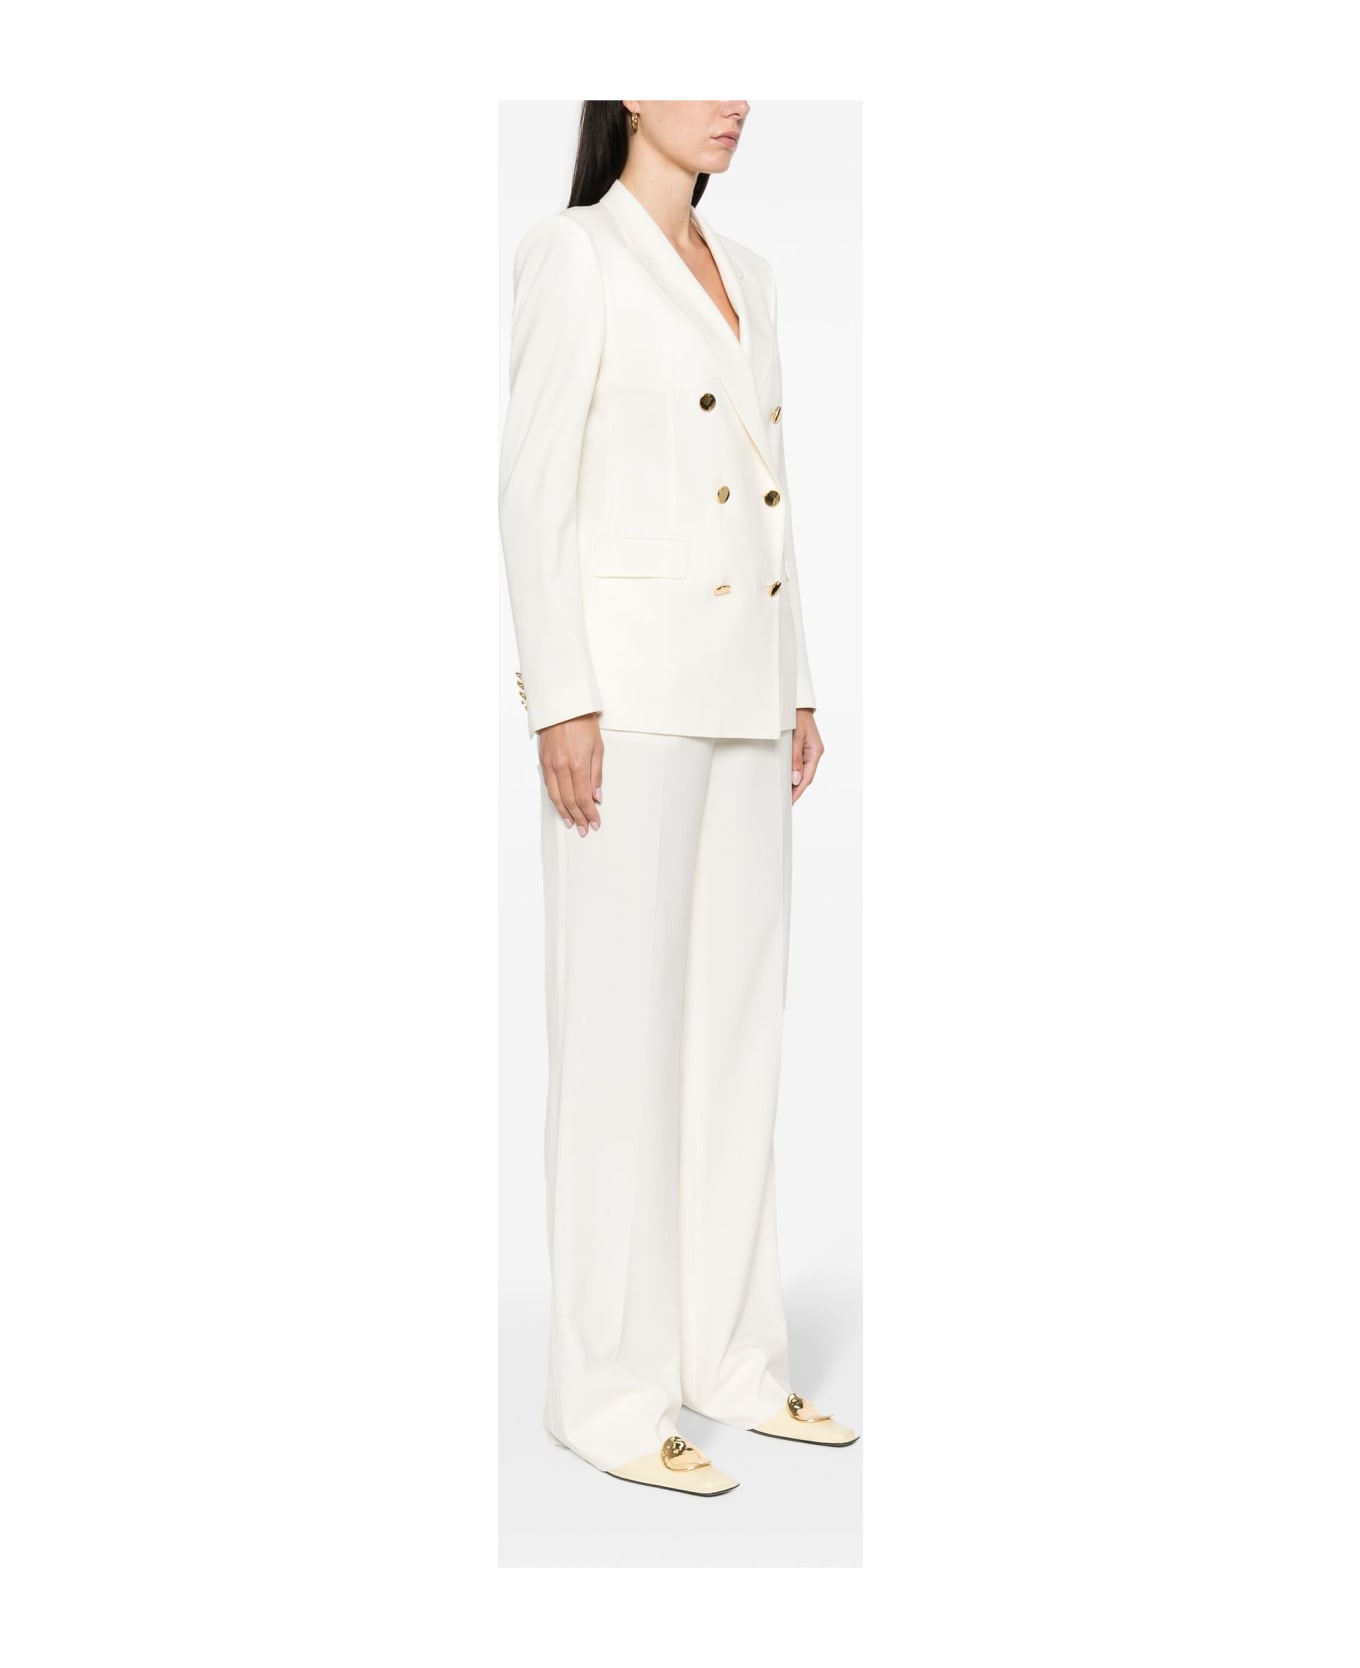 Tagliatore Ivory White Double-breasted Suit - White スーツ